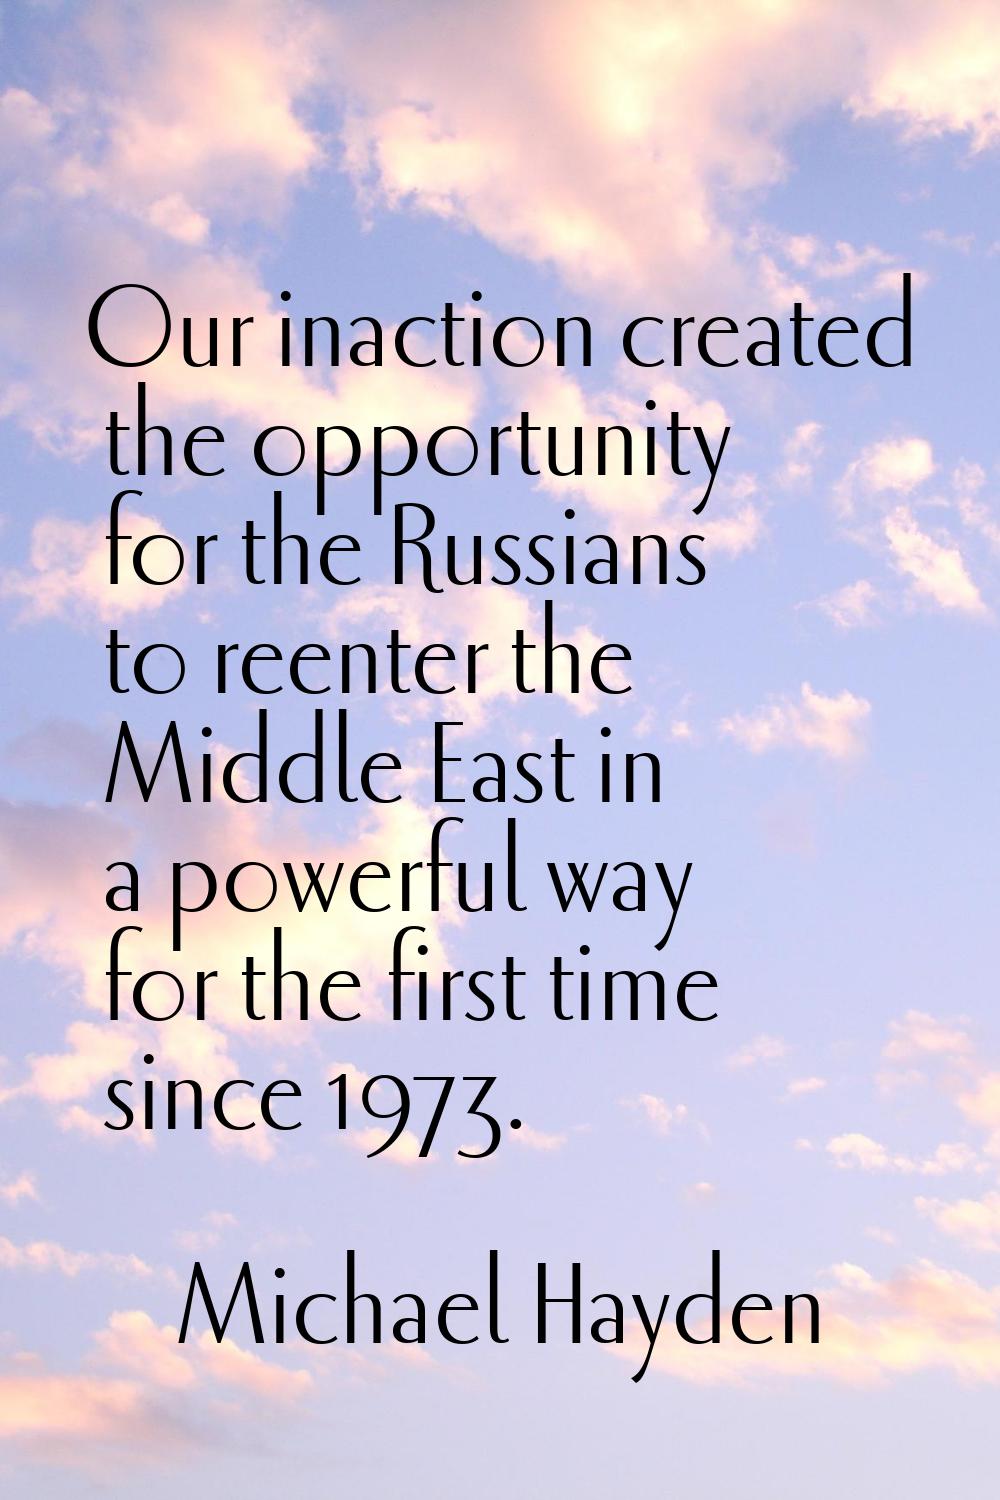 Our inaction created the opportunity for the Russians to reenter the Middle East in a powerful way 